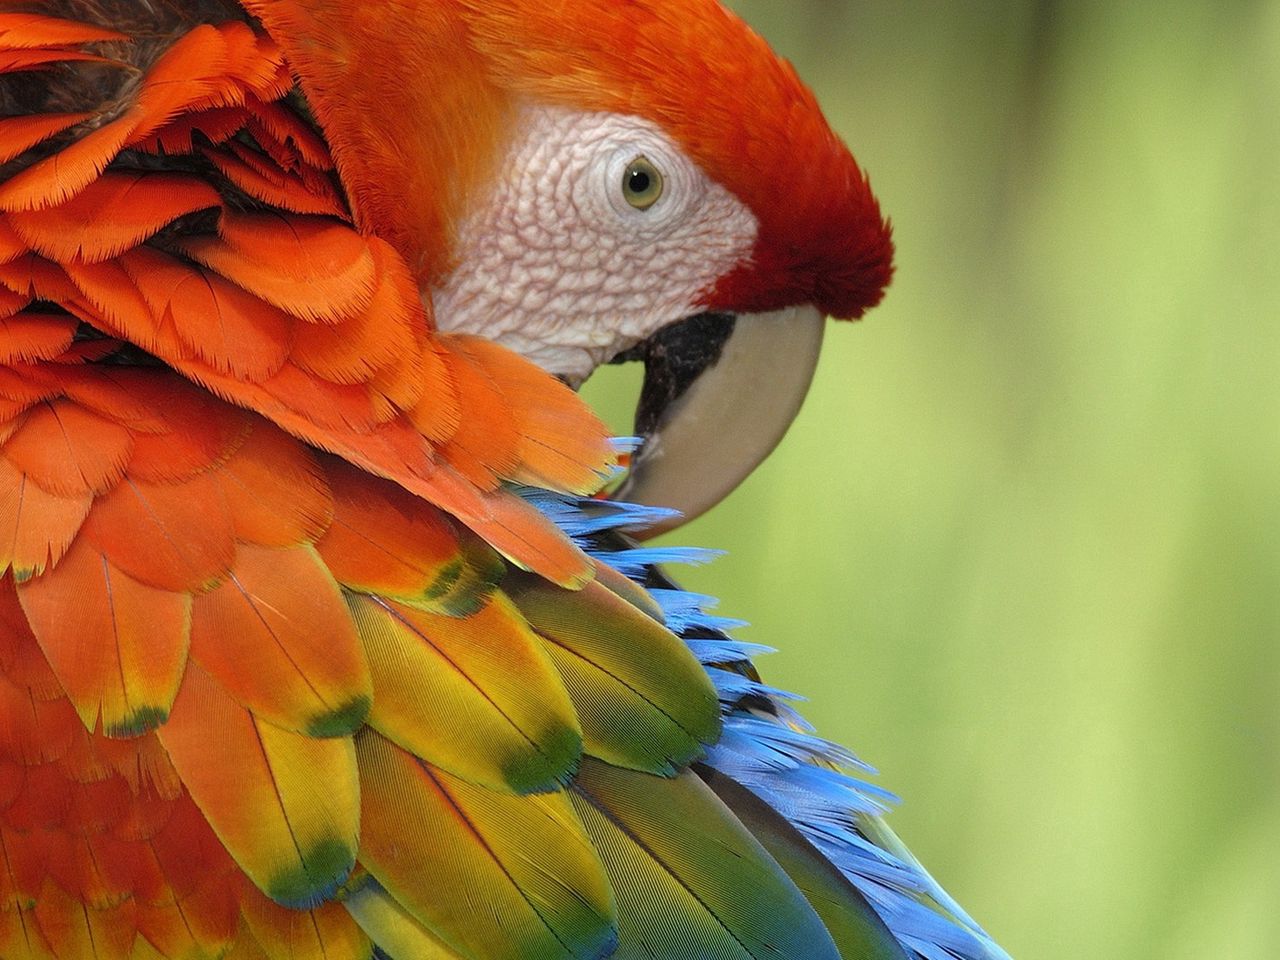 Download wallpaper 1280x960 parrot, feathers, color, colorful, bird standard 4:3 HD background